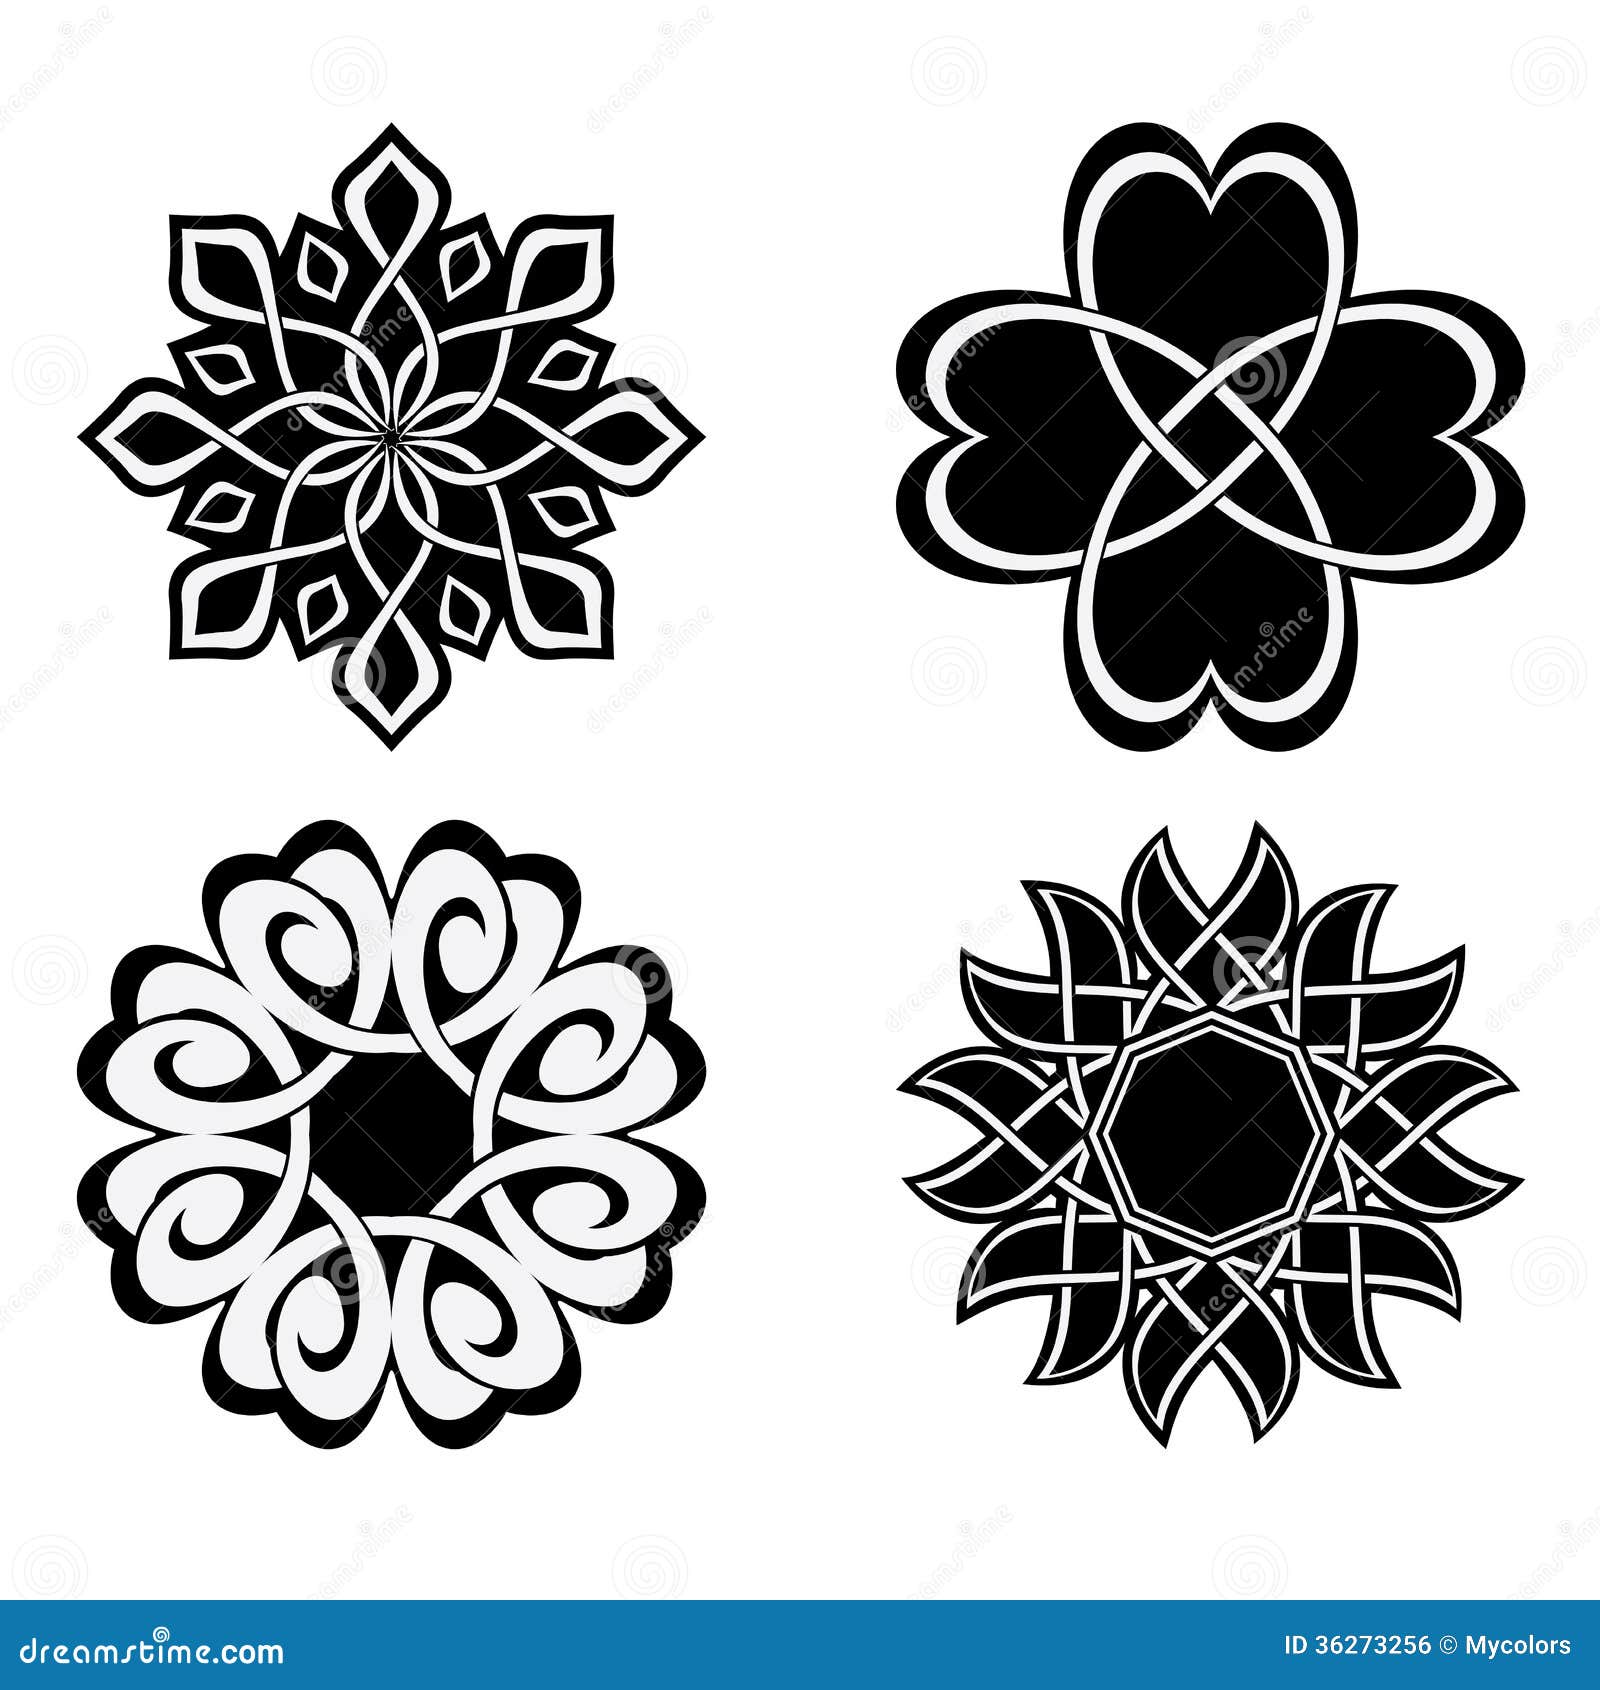 Download Set - Geometric Elements For Design - Vector Royalty Free ...